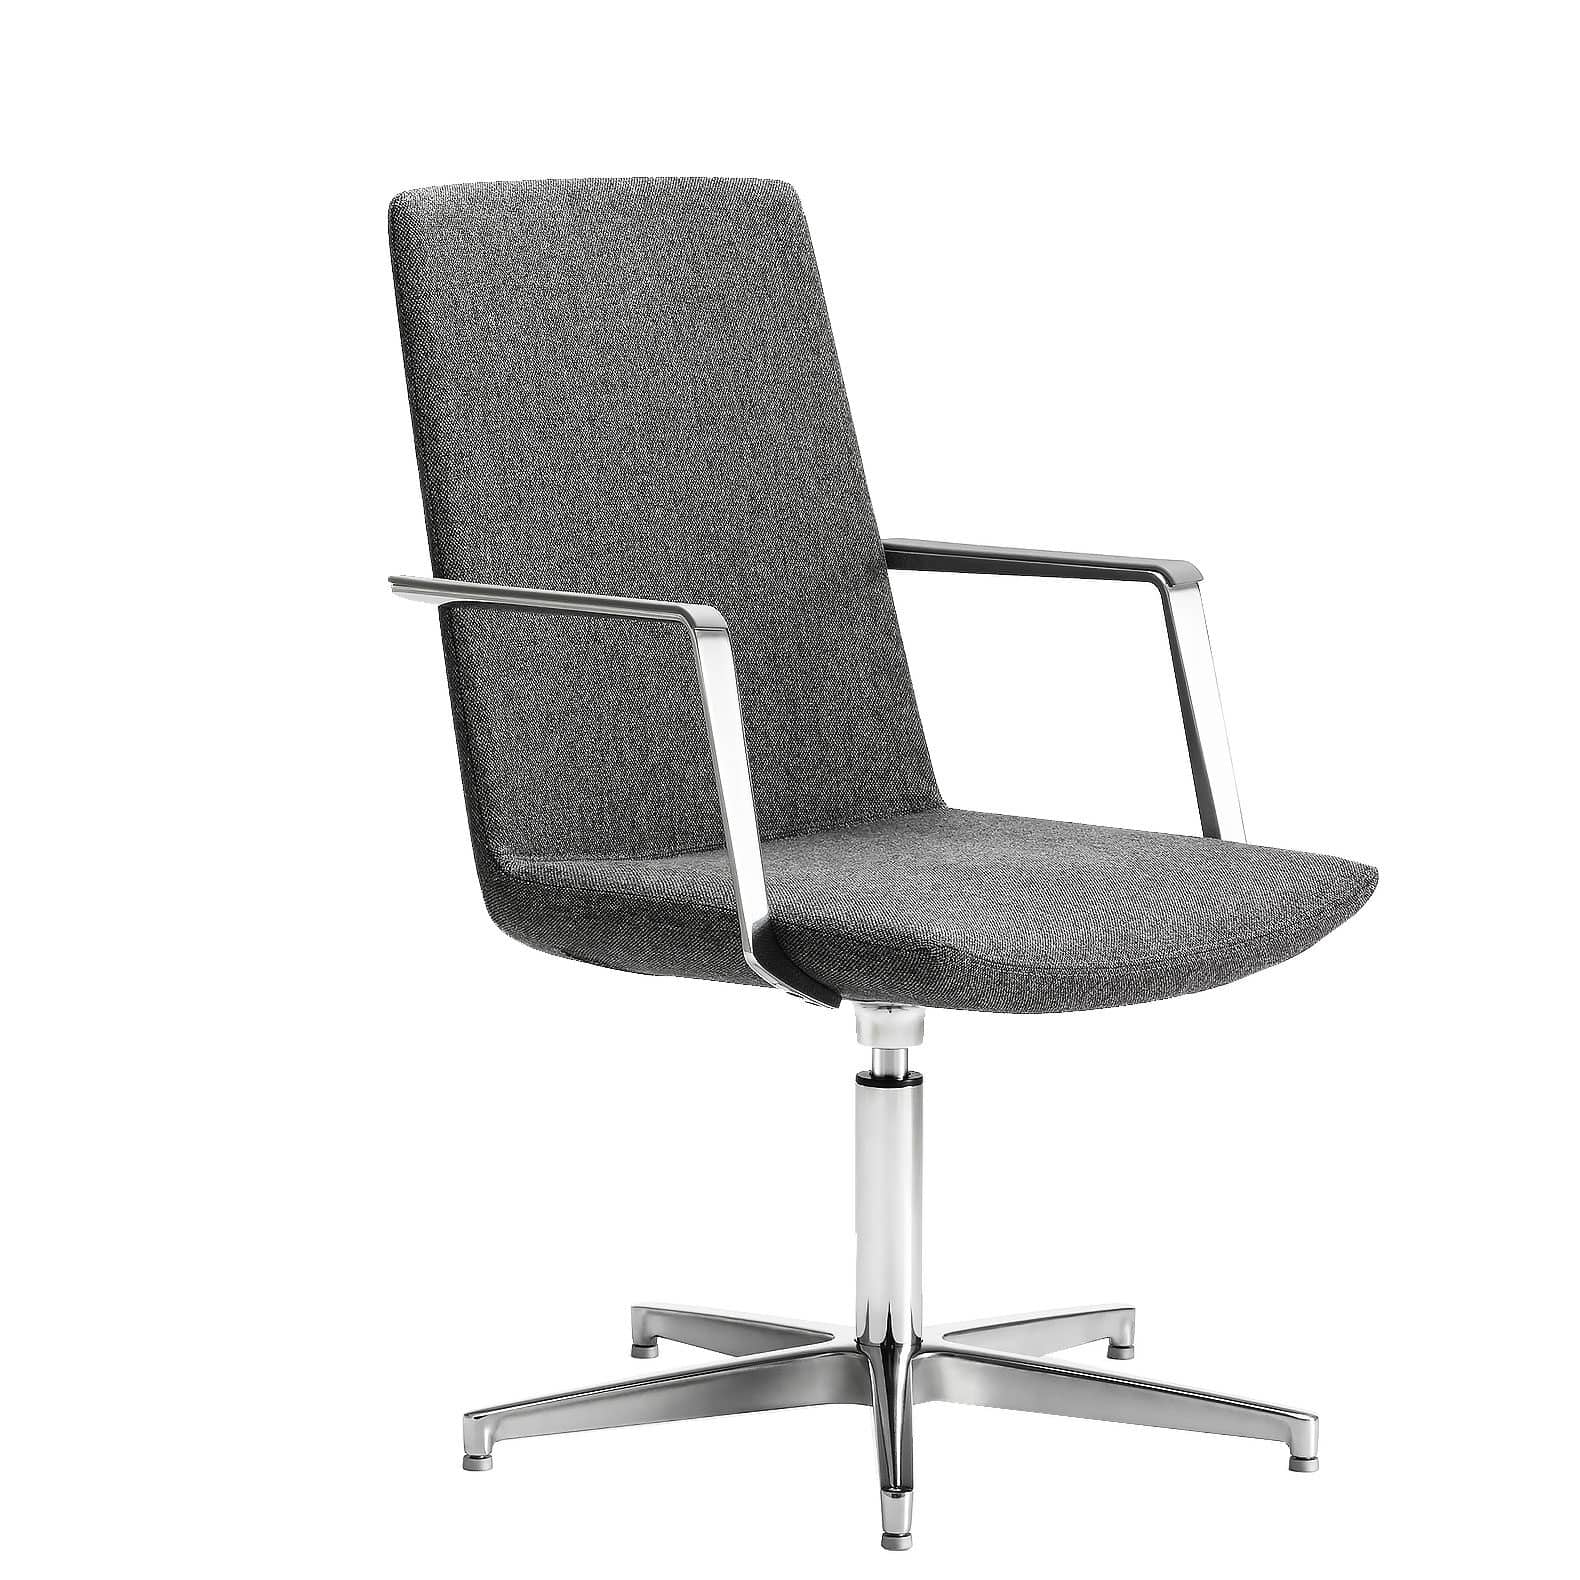 If you're looking for a sleek and sophisticated conference chair, look no further than Source International's Defign series conference chair.